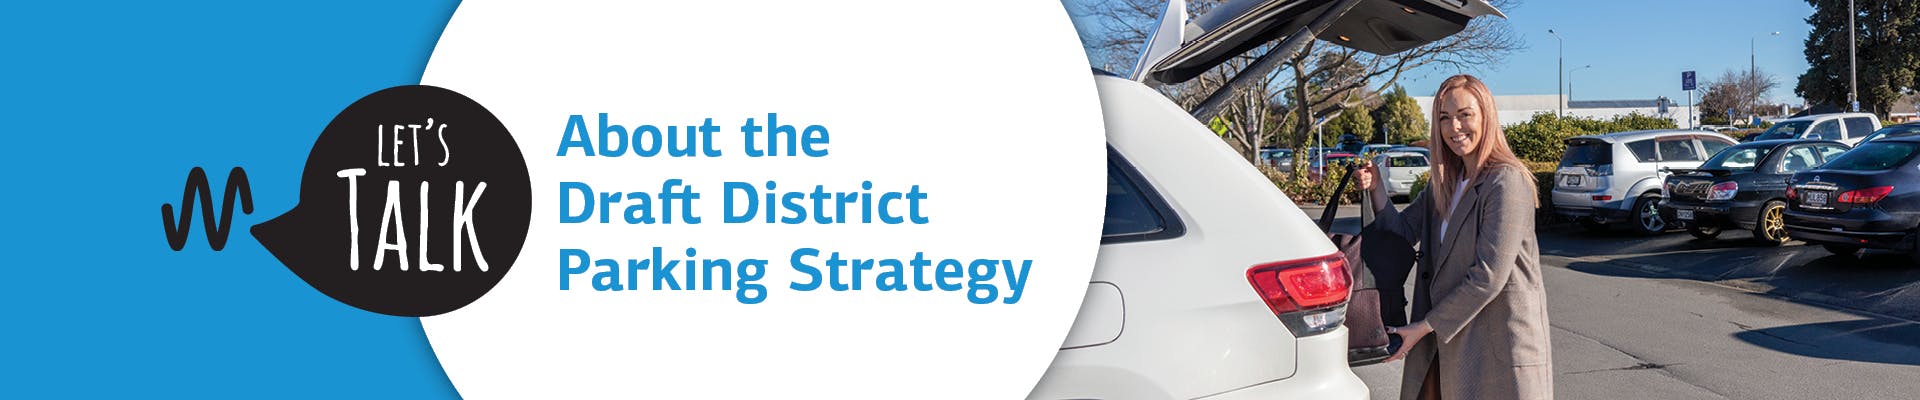 Let's Talk About the Draft District Parking Strategy